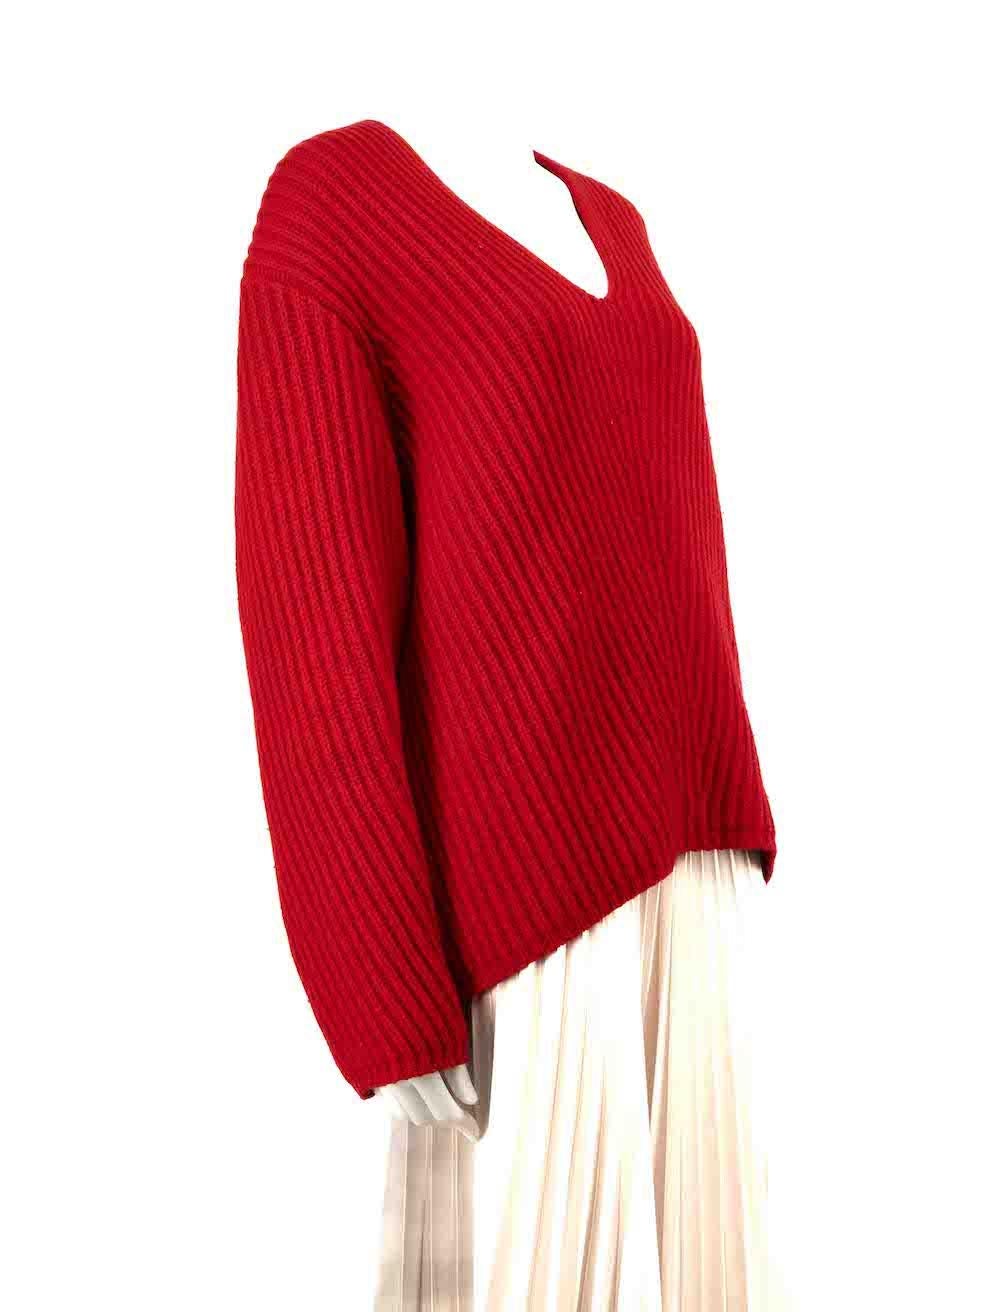 CONDITION is Good. Minor wear to jumper is evident. Light wear to the knitted surface which shows mild pilling throughout on this used Acne Studios designer resale item.
 
 Details
 Red
 Wool
 Knit jumper
 V-neck
 Long sleeves
 
 
 Made in China
 
